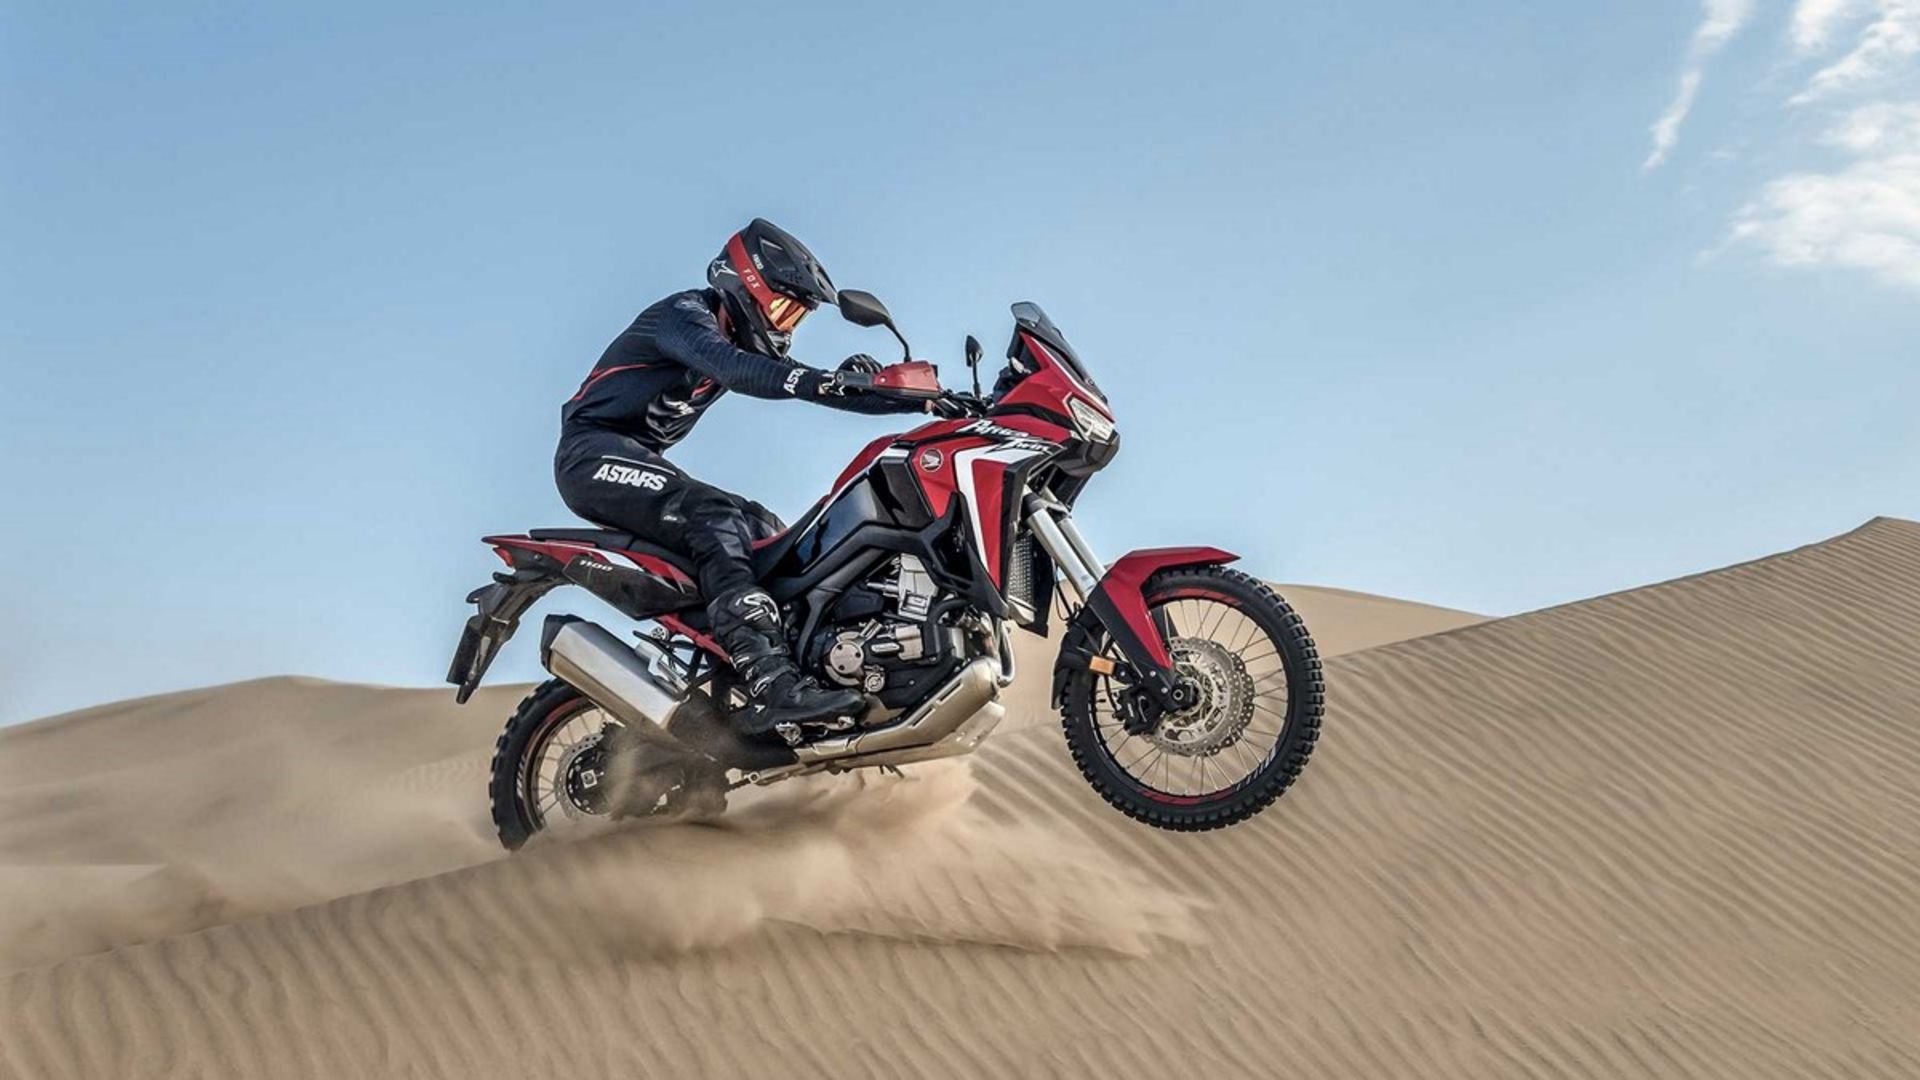 2020 CRF1100L Africa Twin